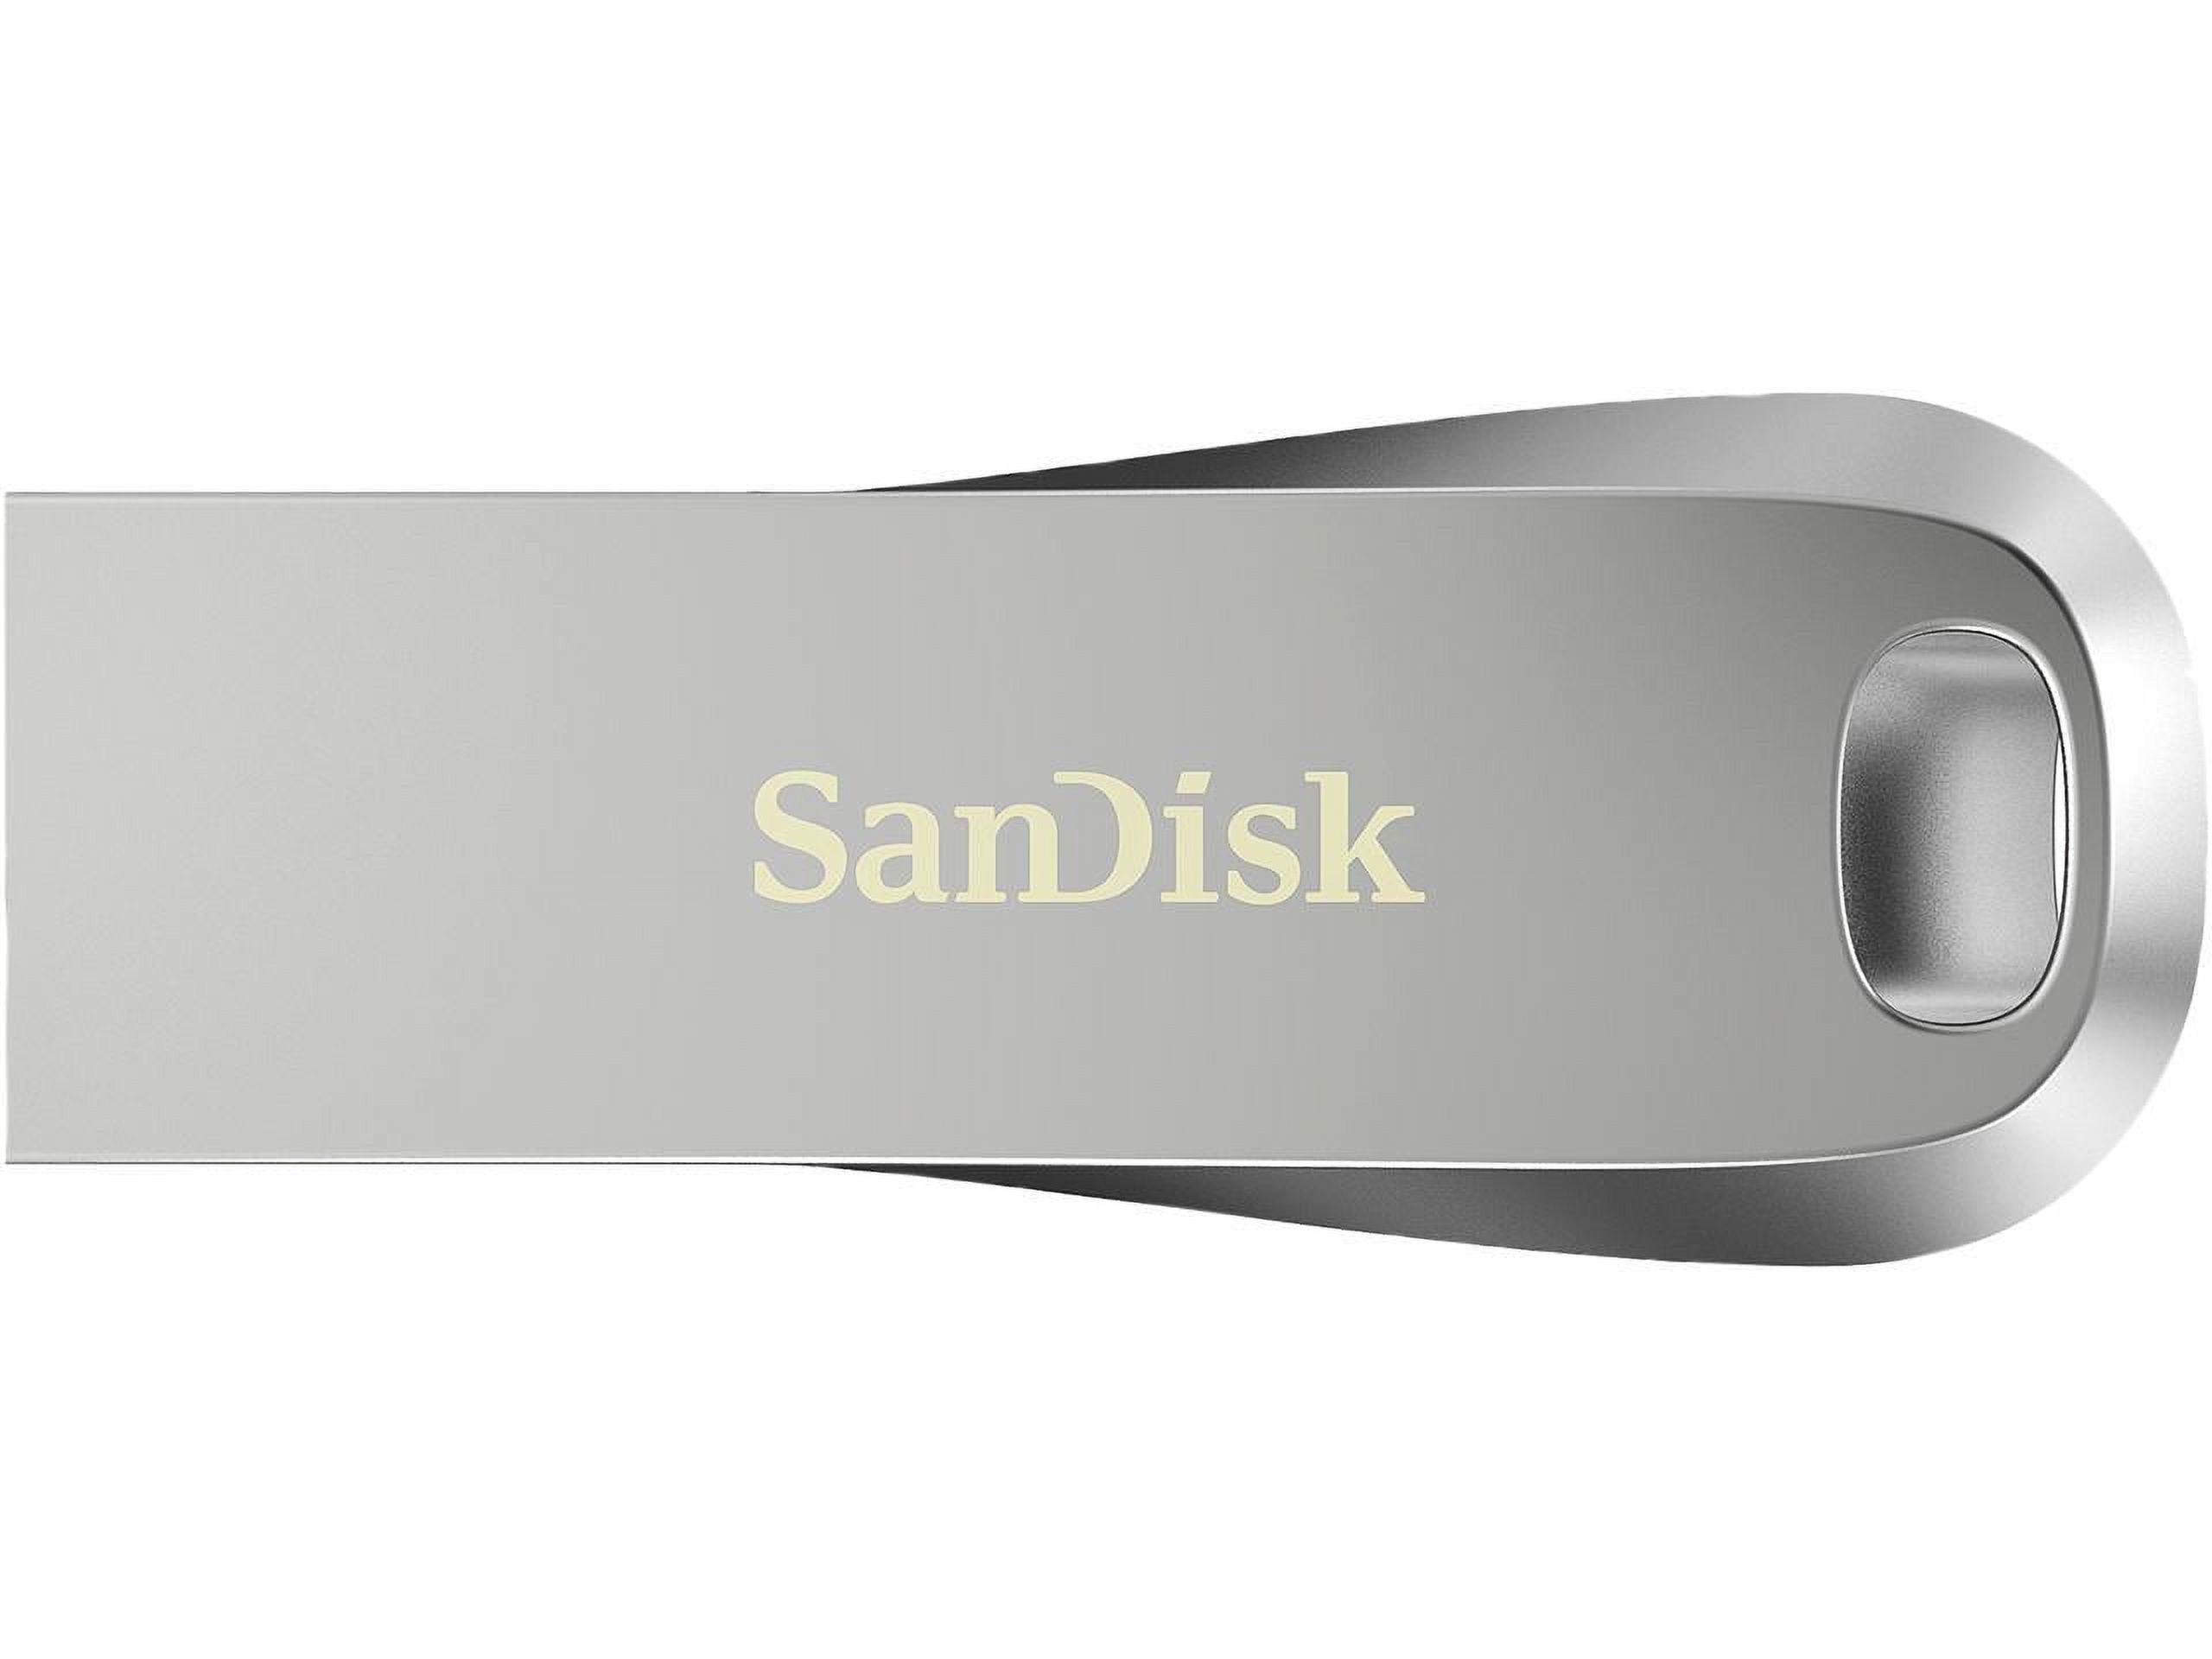 SanDisk 128GB Ultra Luxe USB 3.1 Flash Drive, Speed Up to 150MB/s (SDCZ74-128G-G46) - image 1 of 5